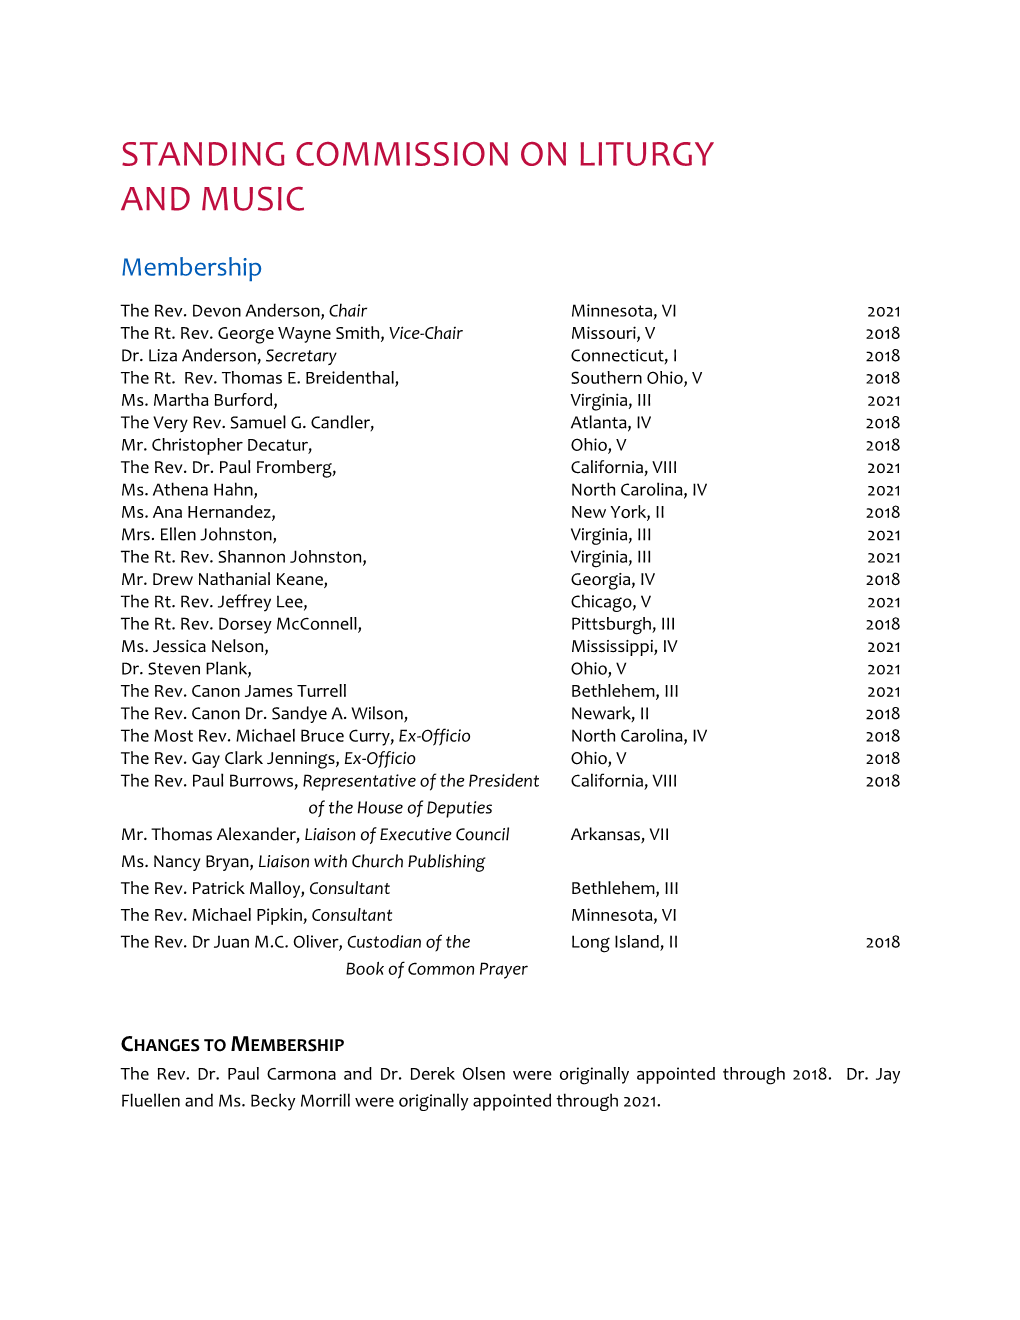 Standing Commission on Liturgy and Music